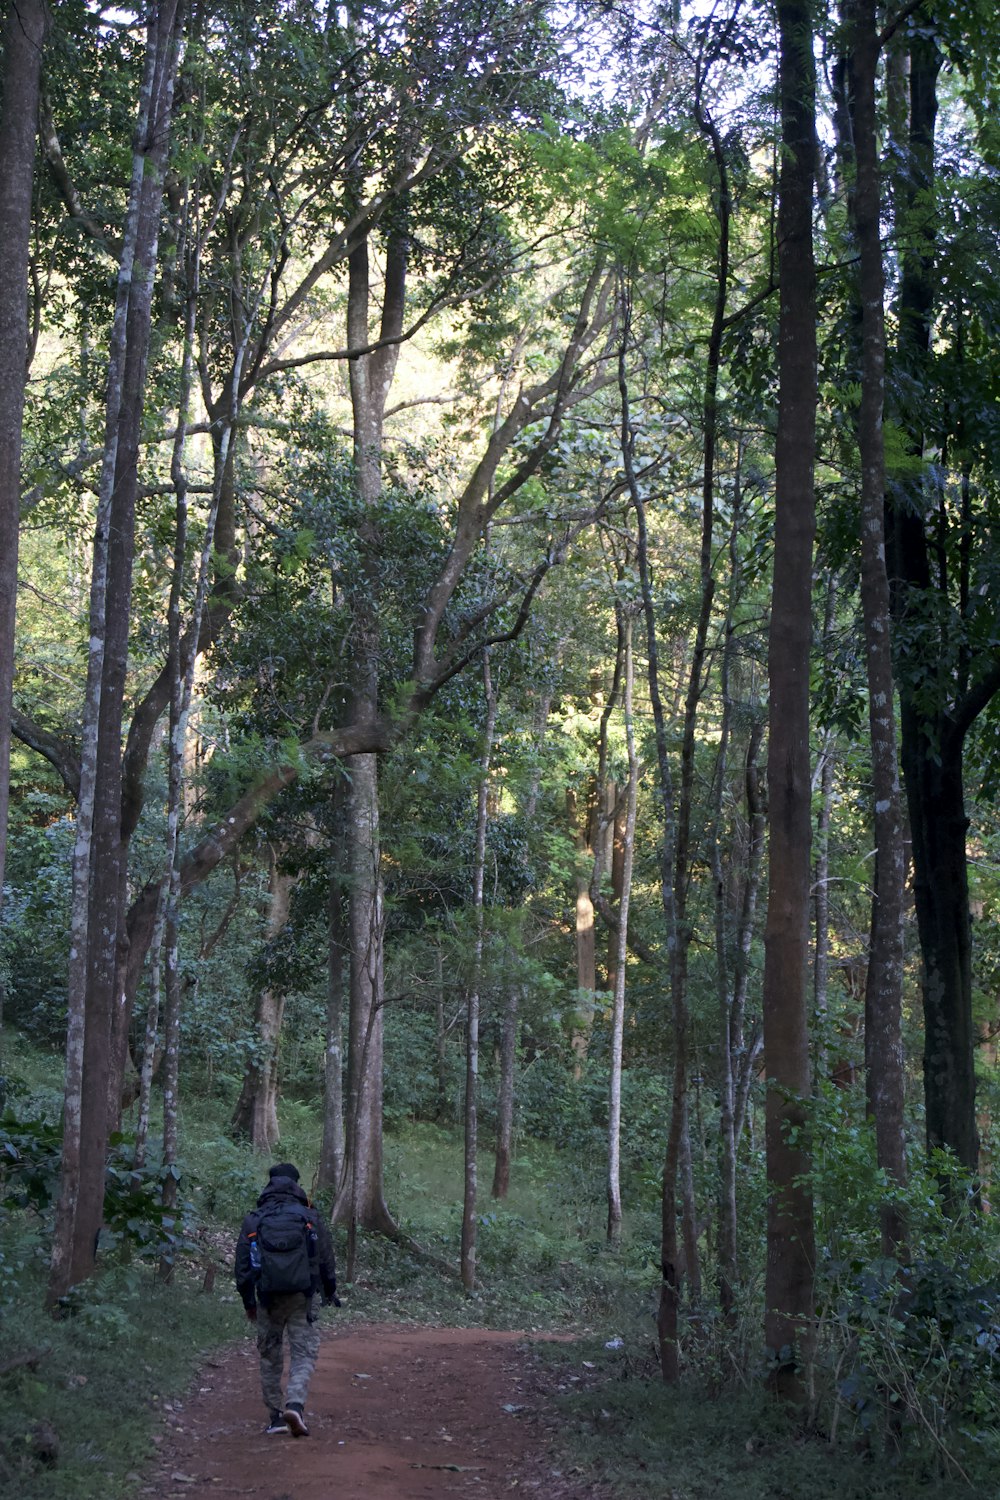 a man walking down a dirt road in the woods